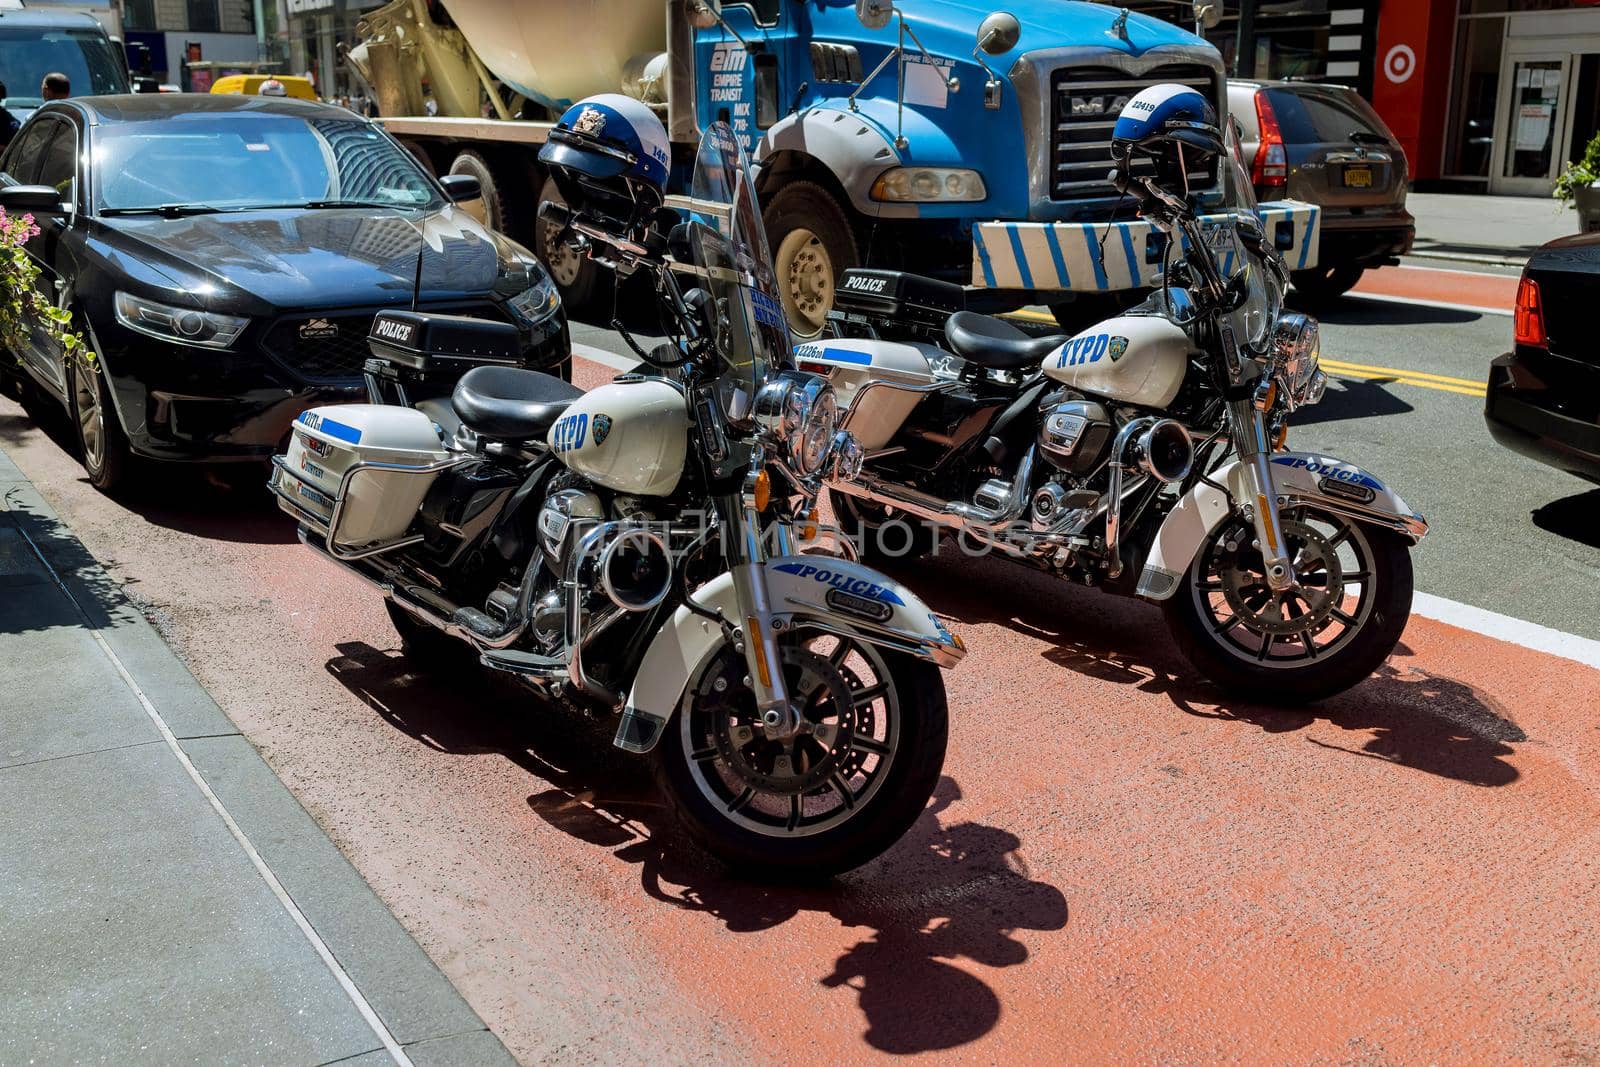 18 June 2021 New York, USA: Police in street on Motorcycle from New York City Police